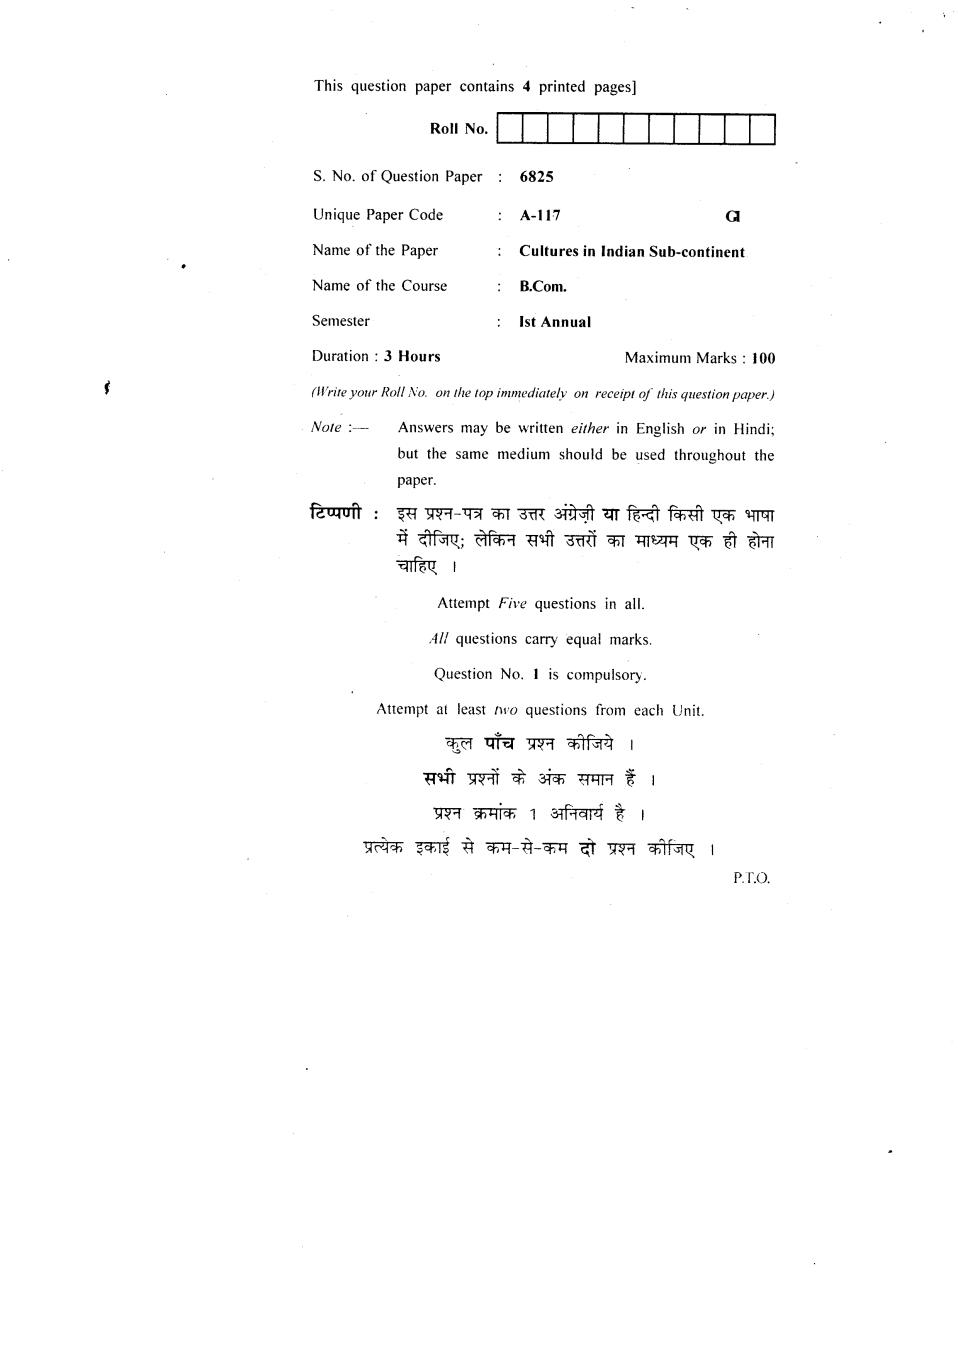 DU SOL B.Com Question Paper 1st Year 2018 Cultures in Indian Sub-continent - Page 1